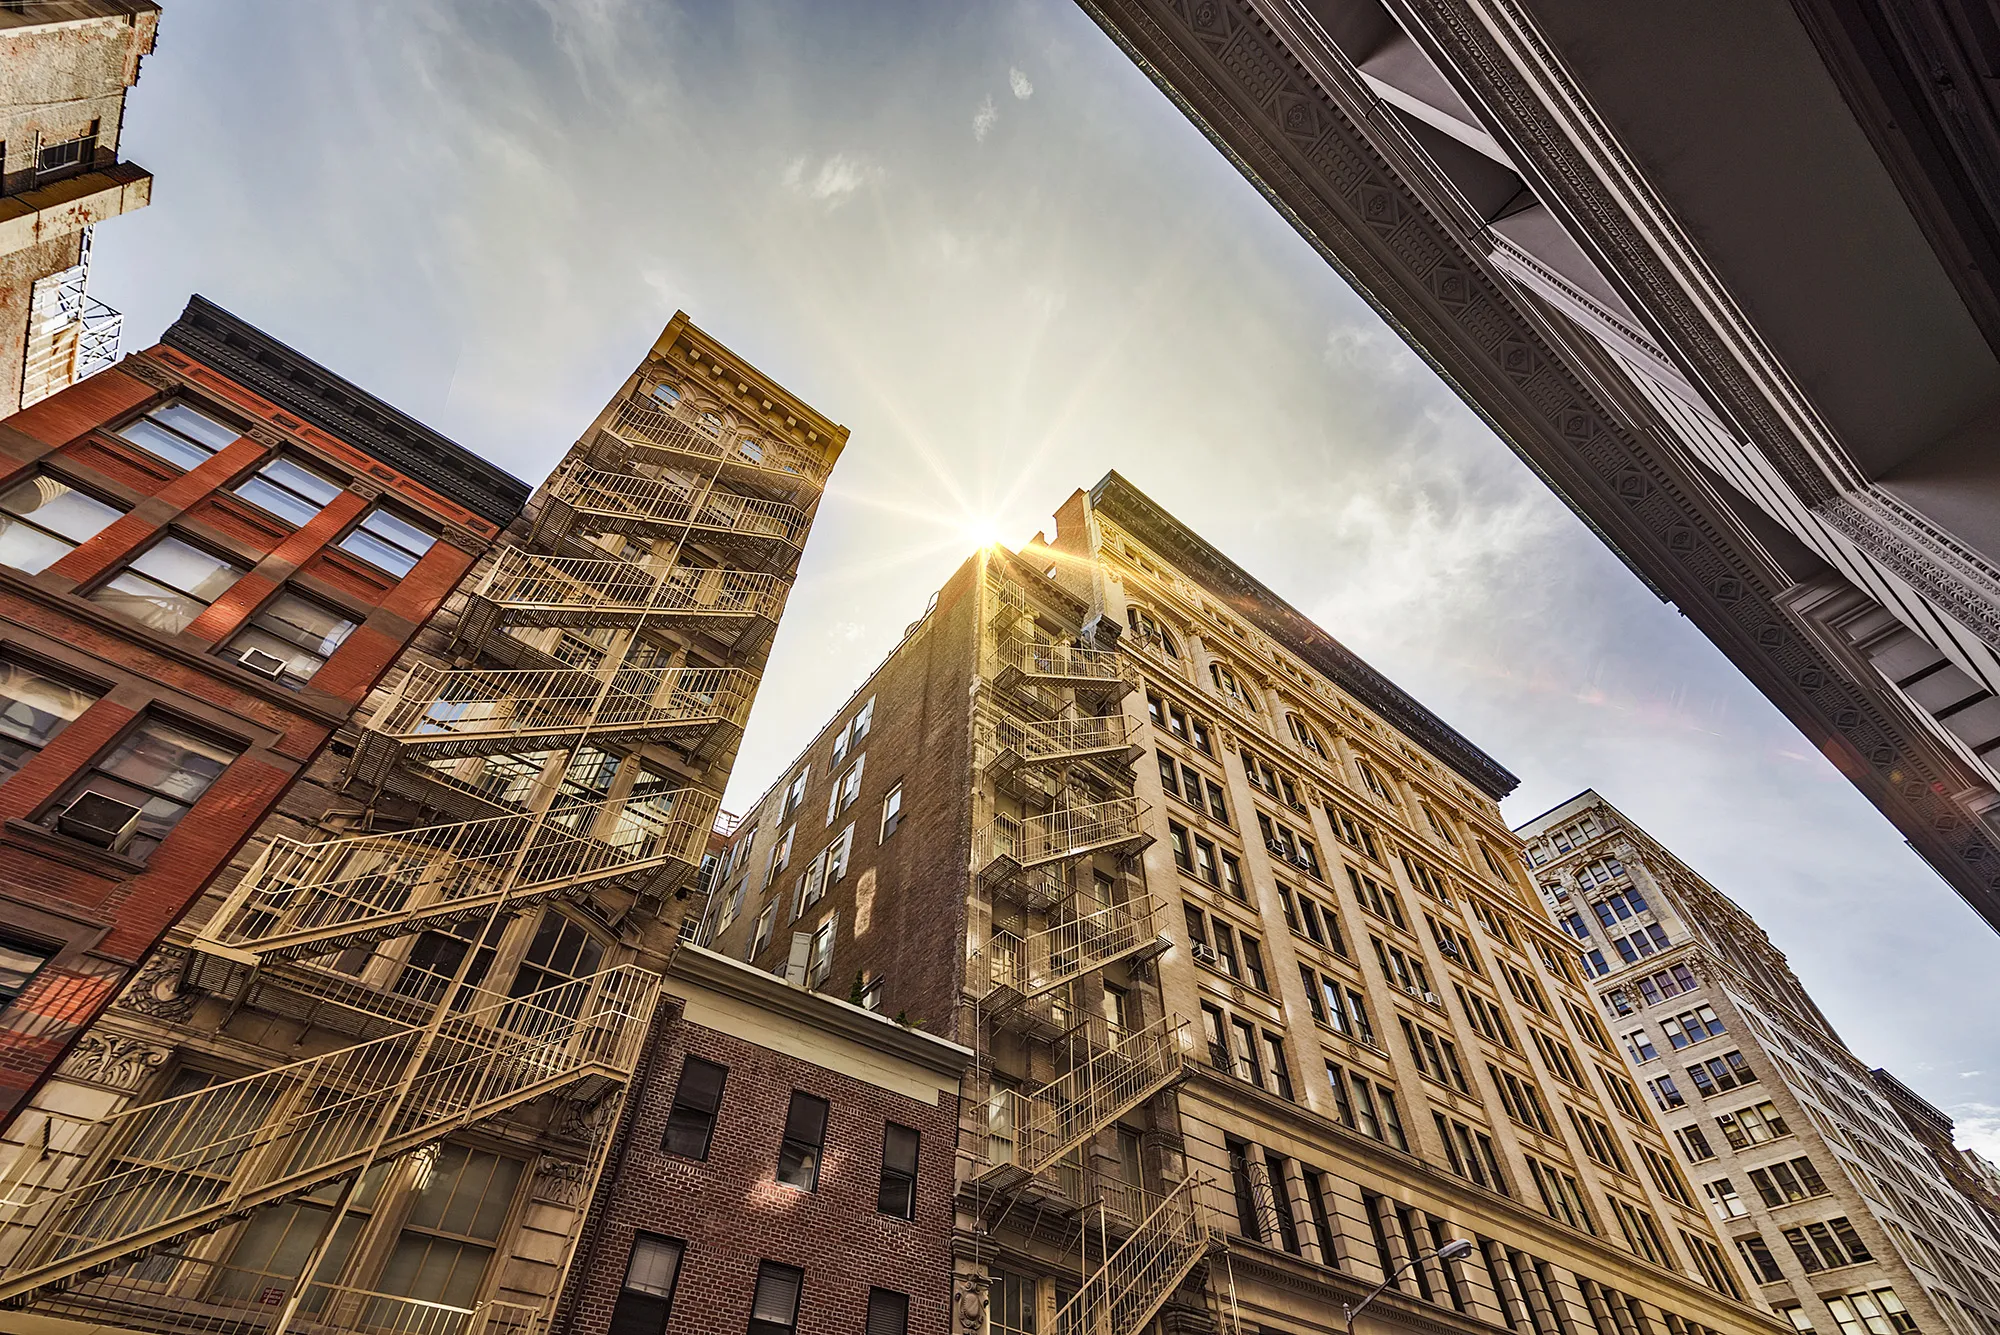 New York Real Estate Faces Historic Downturn. (Photo Internet reproduction)